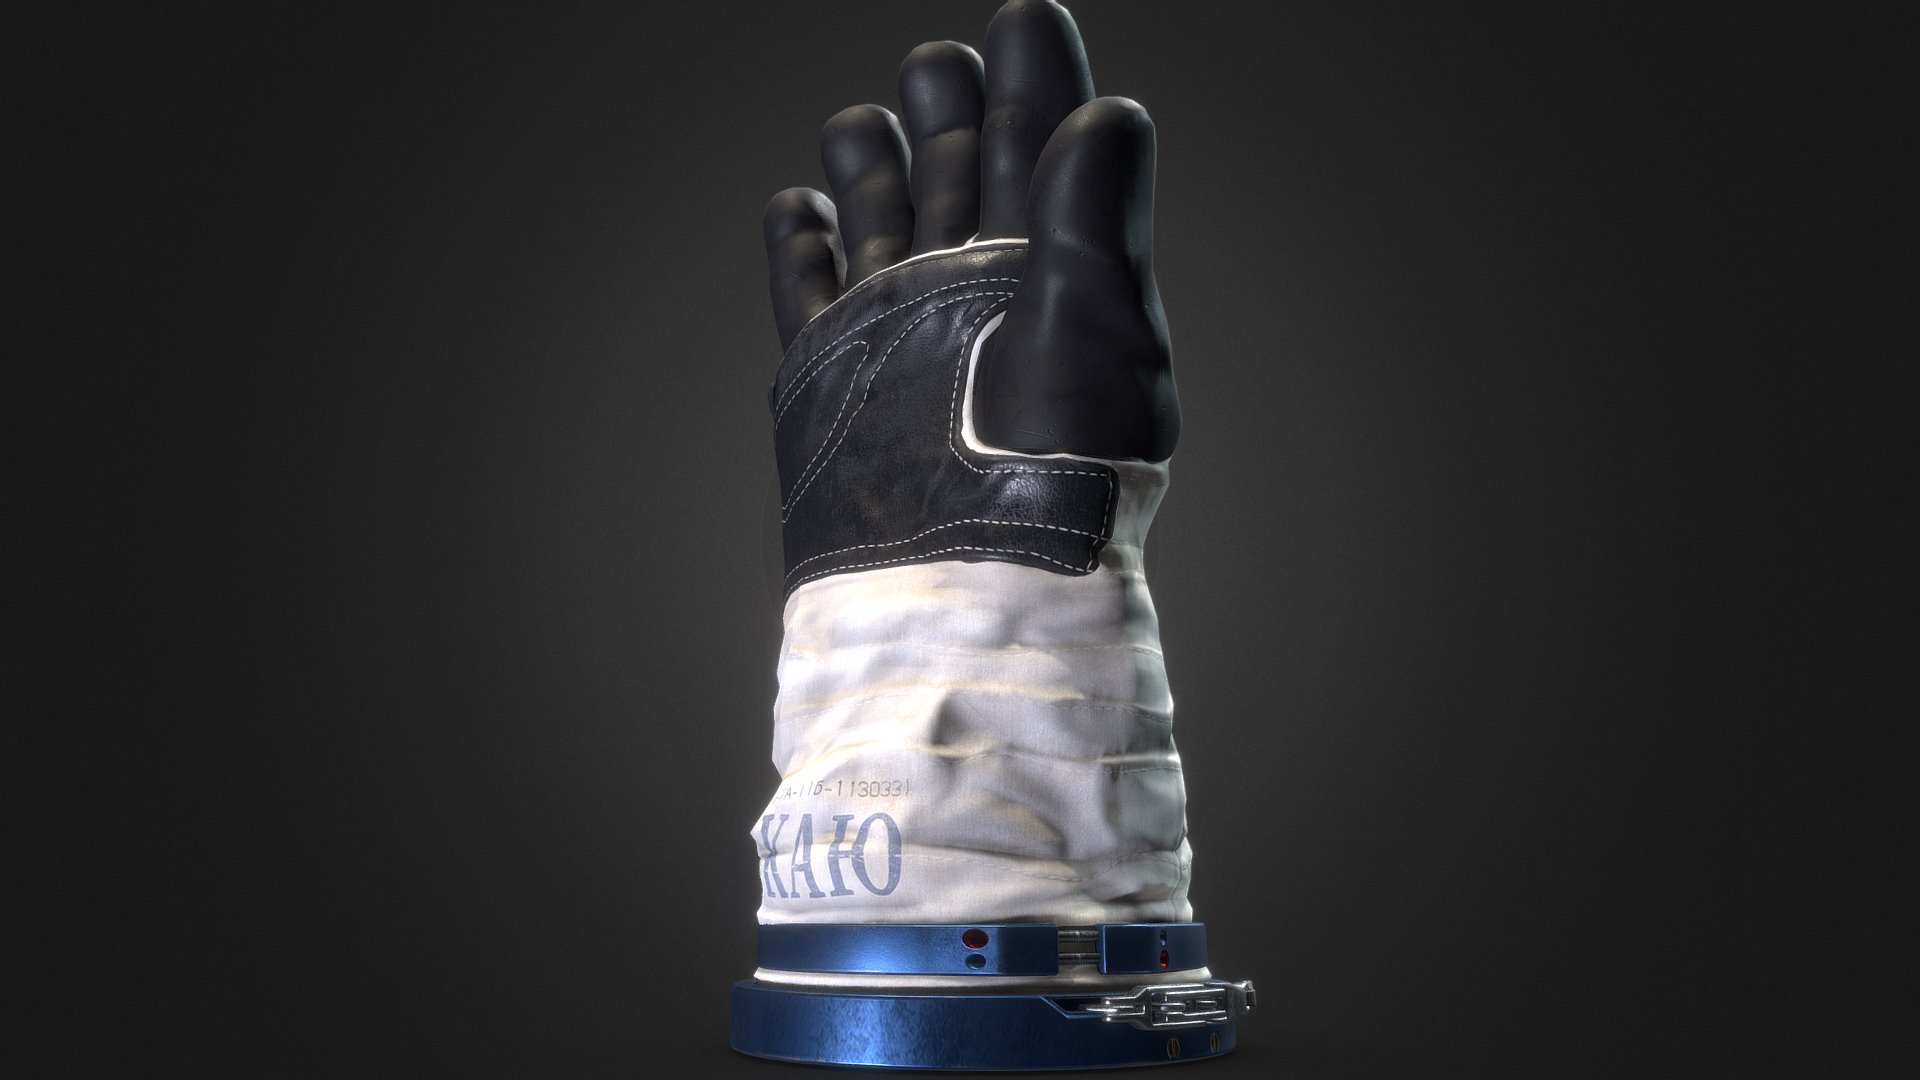 3D model Astronauts Glove - This is a 3D model of the Astronauts Glove. The 3D model is about a person's foot in a shoe.